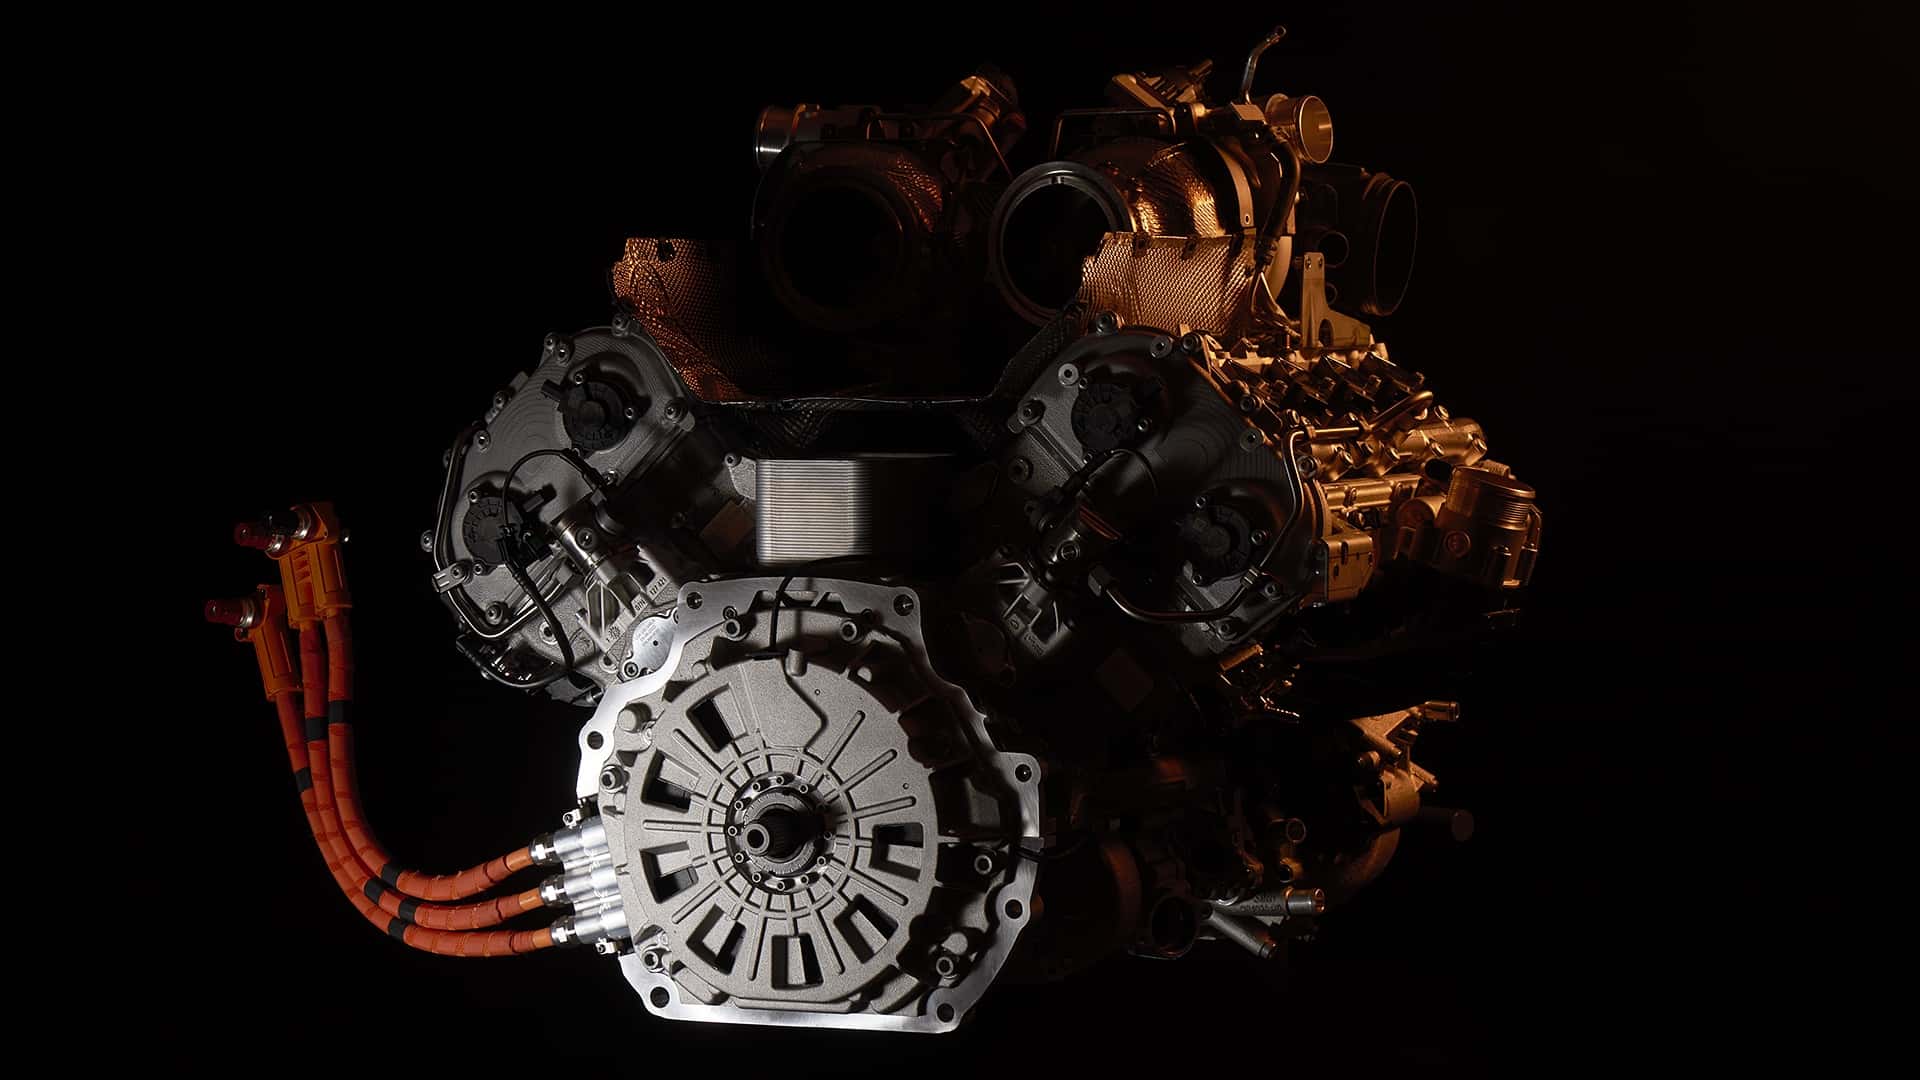 New engine from another angle.